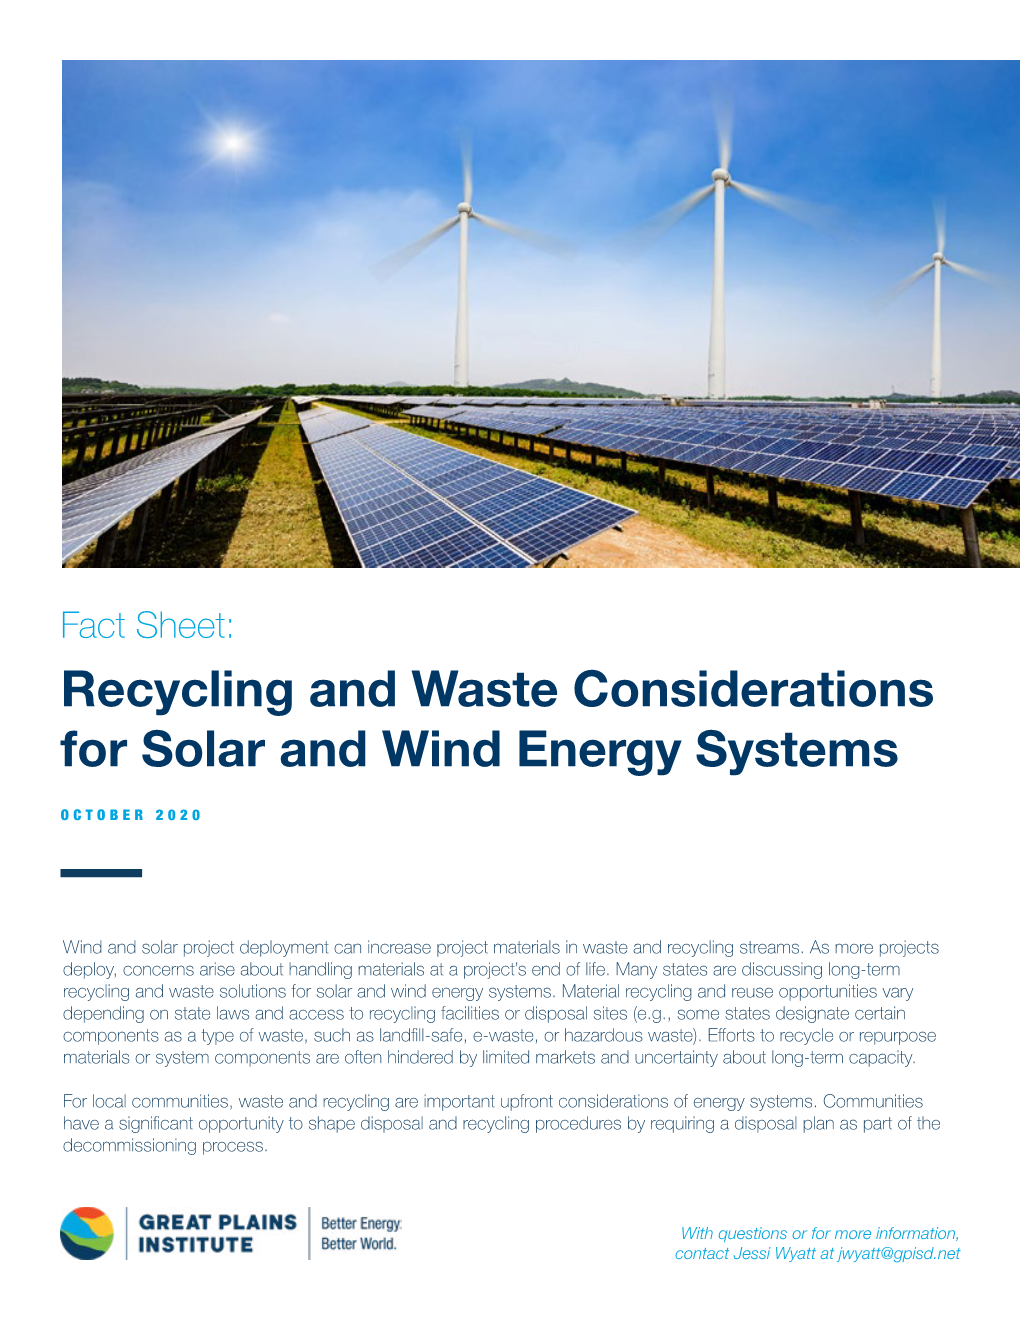 Recycling and Waste Considerations for Solar and Wind Energy Systems